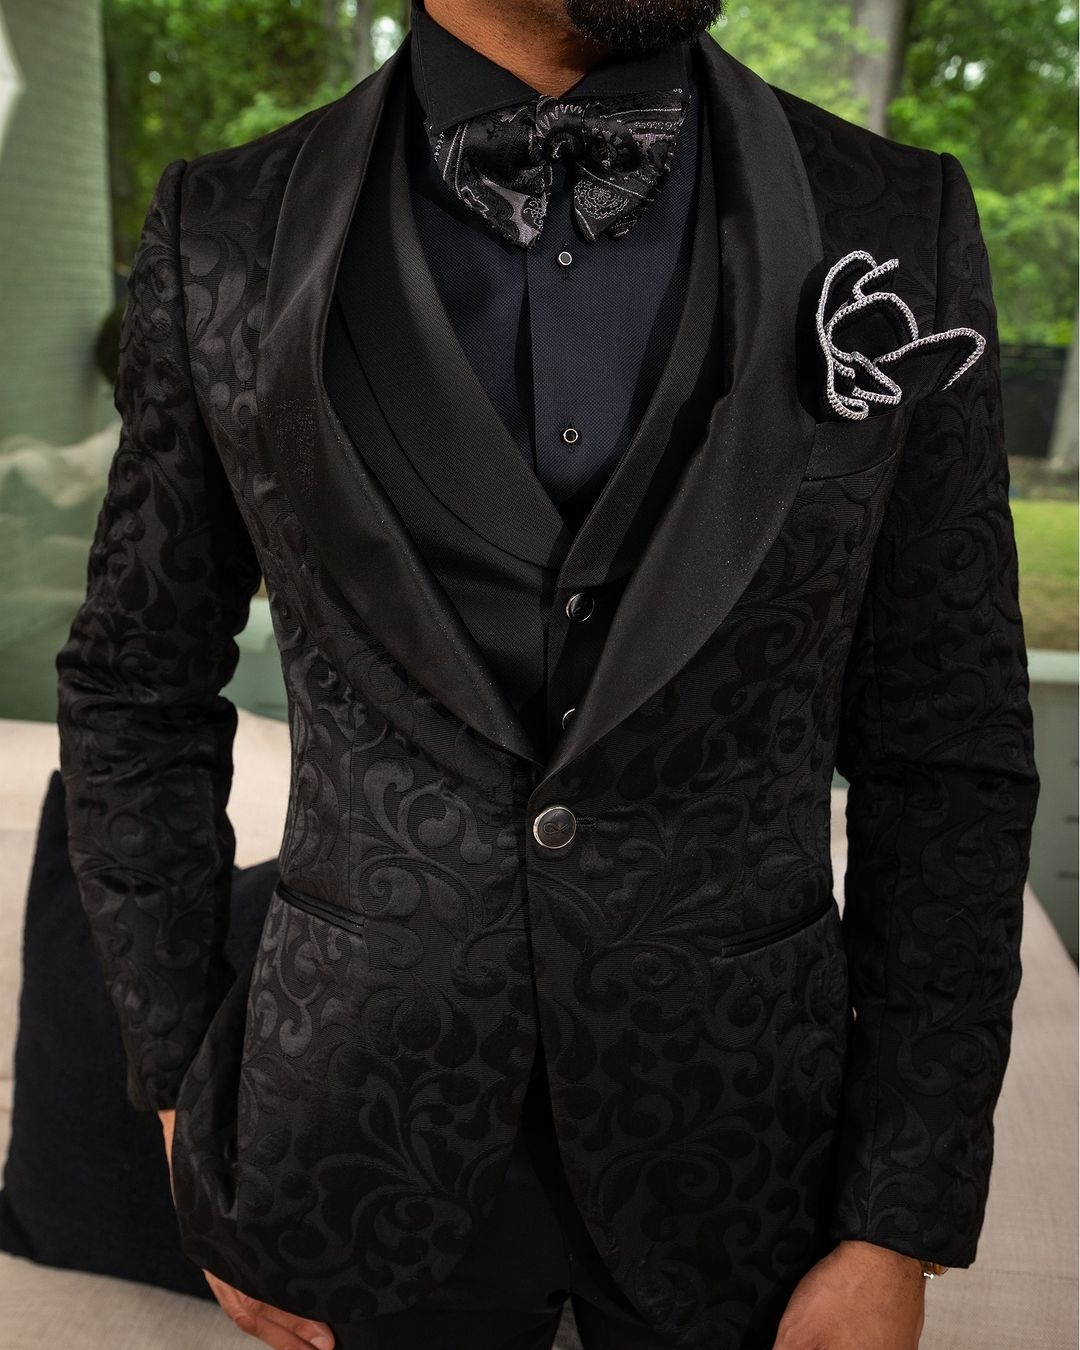 Floral Jacquard Men Wedding Suits Shawl Lapel Tuxedos Fashion Groom Wear Prom Party Blazer Vest With Pants Custom Made